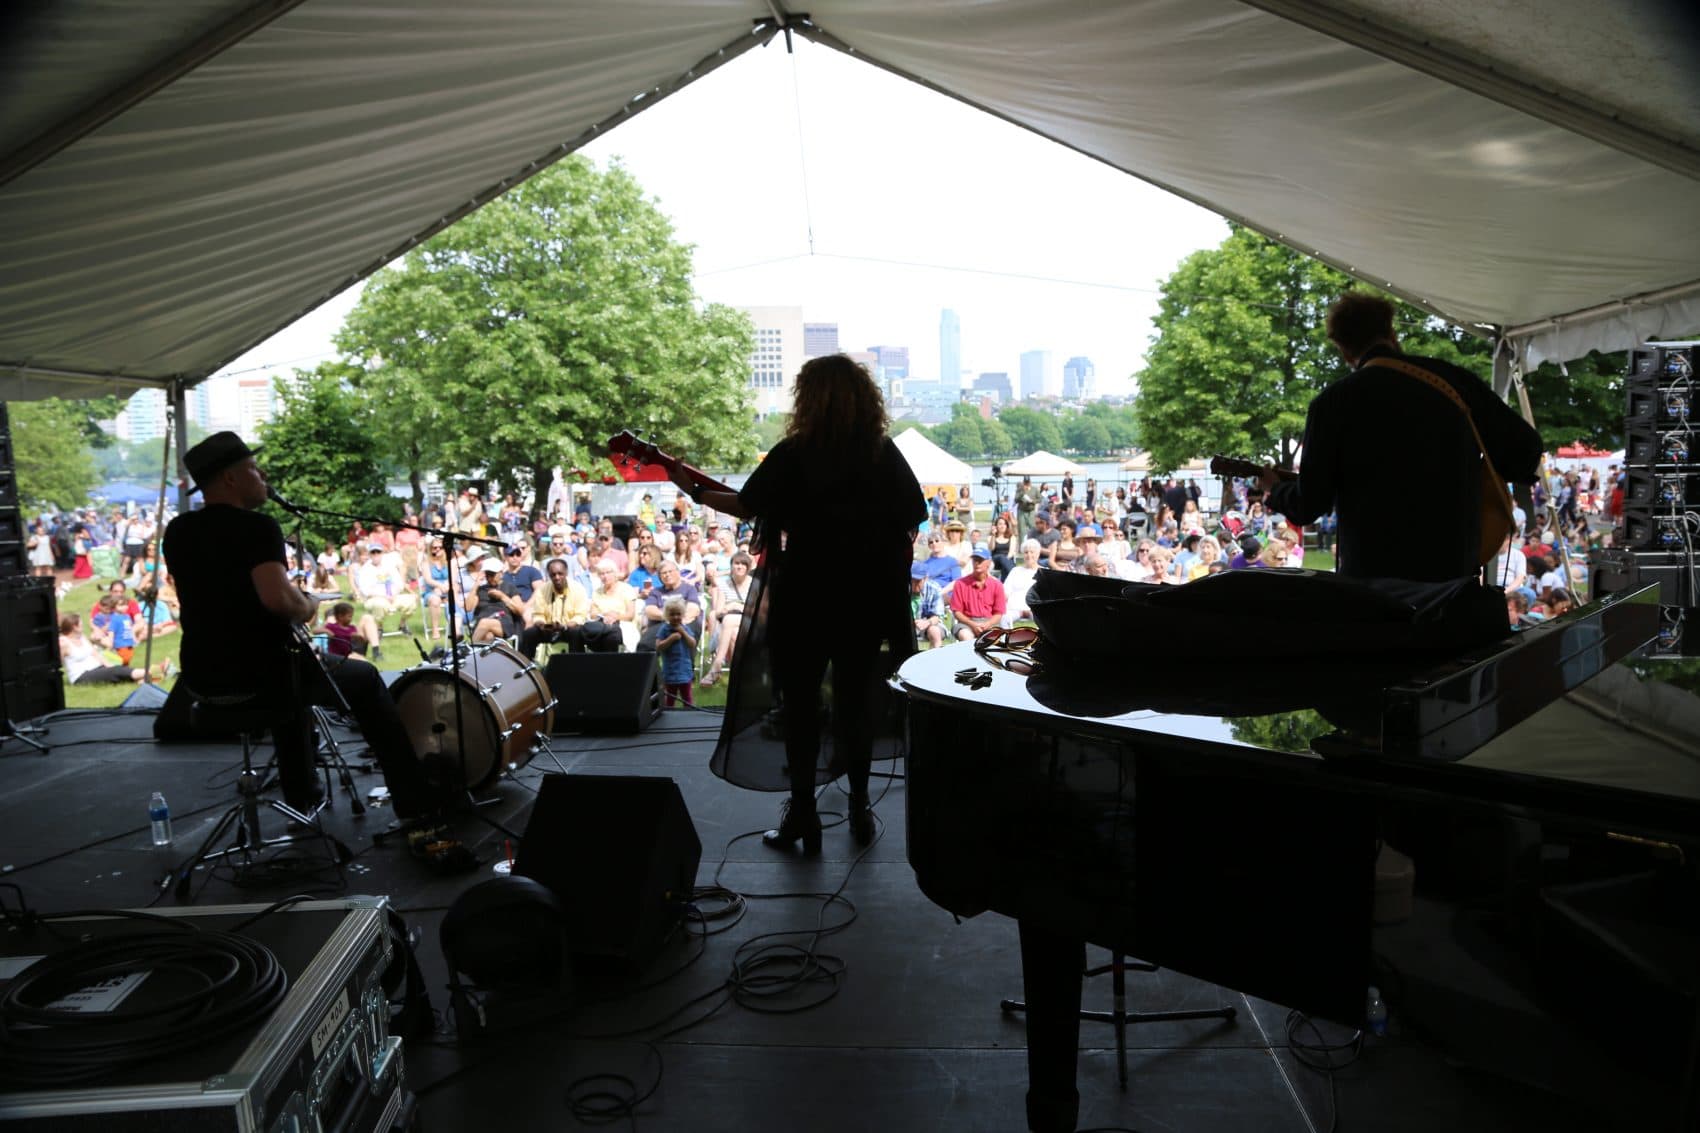 A band plays at the Cambridge River Fest in 2016. (Courtesy Cambridge Arts)